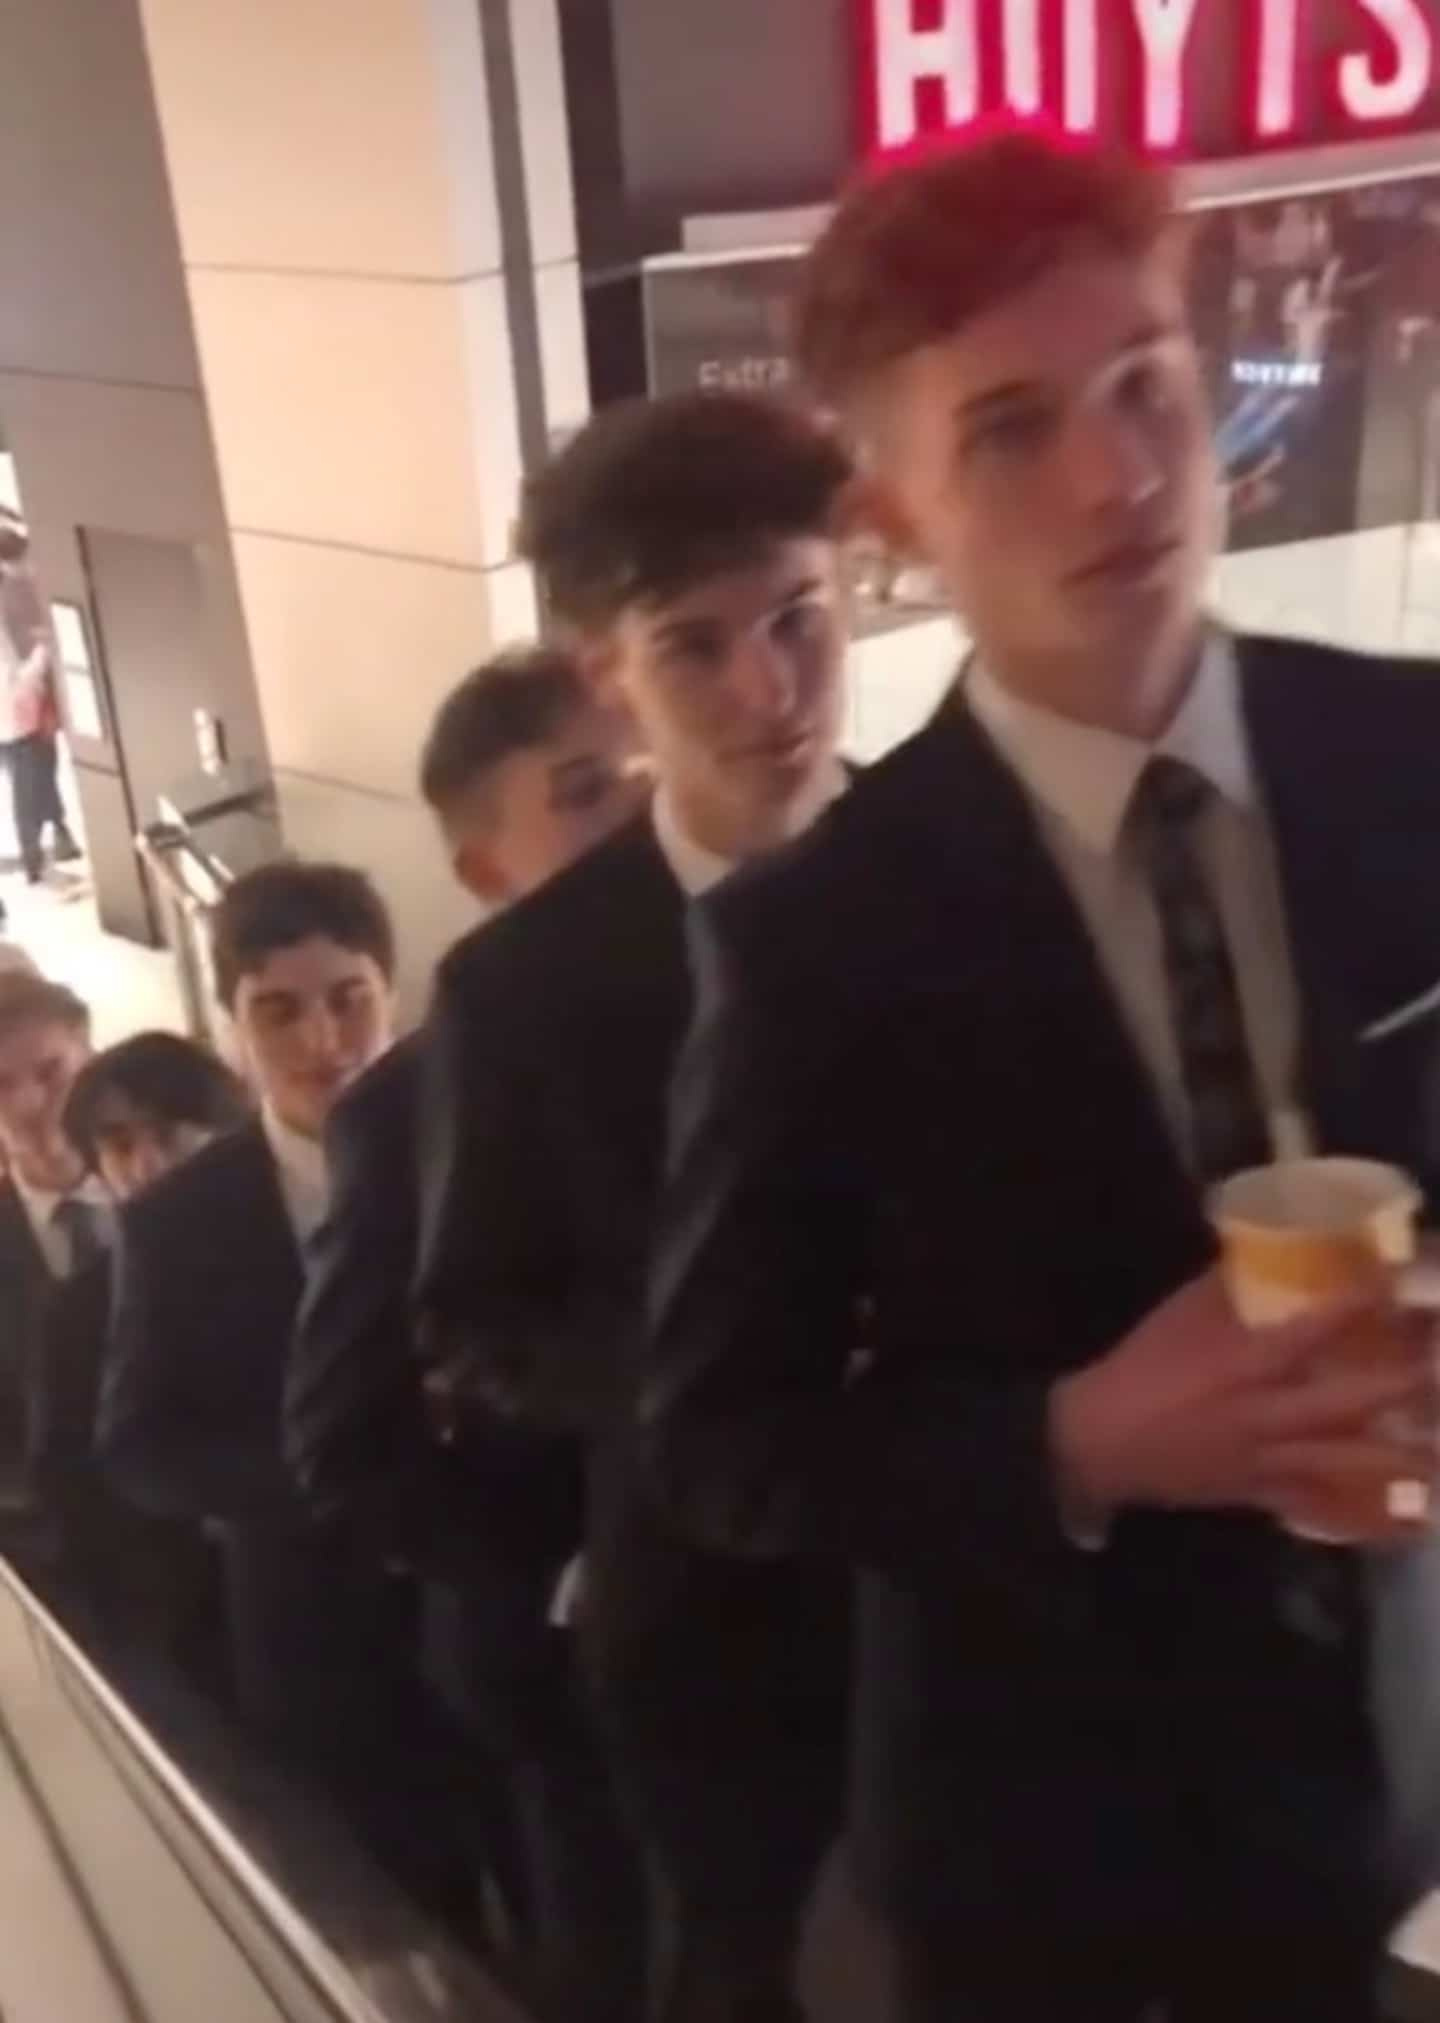 Viral challenge on TikTok: teenagers in suits who came to see “Minions” banned from the cinema